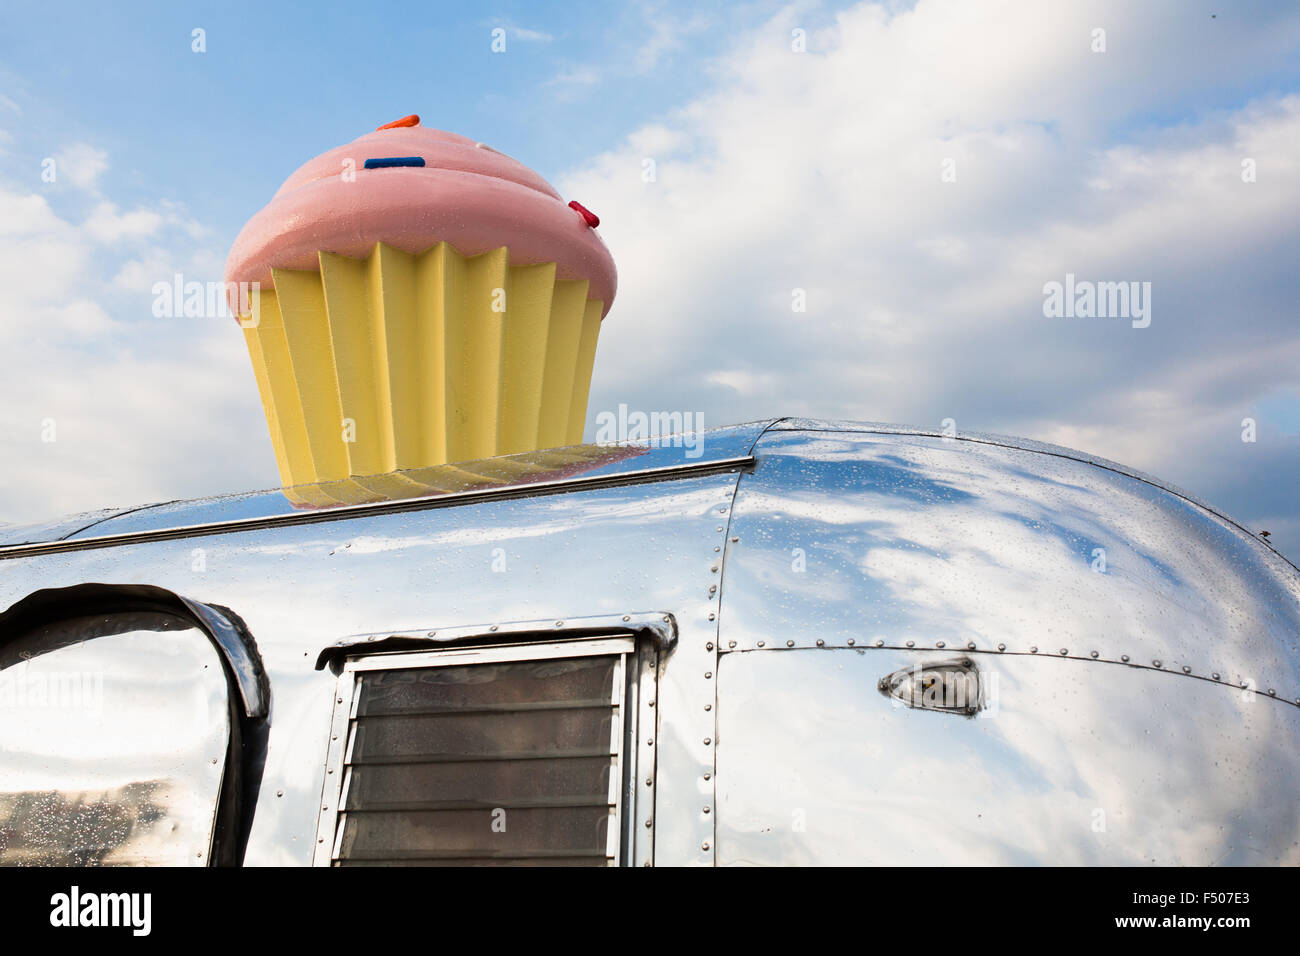 Hey Cupcake in Austin, Texas: A pink cupcake sign on top of a silver metallic trailer Stock Photo